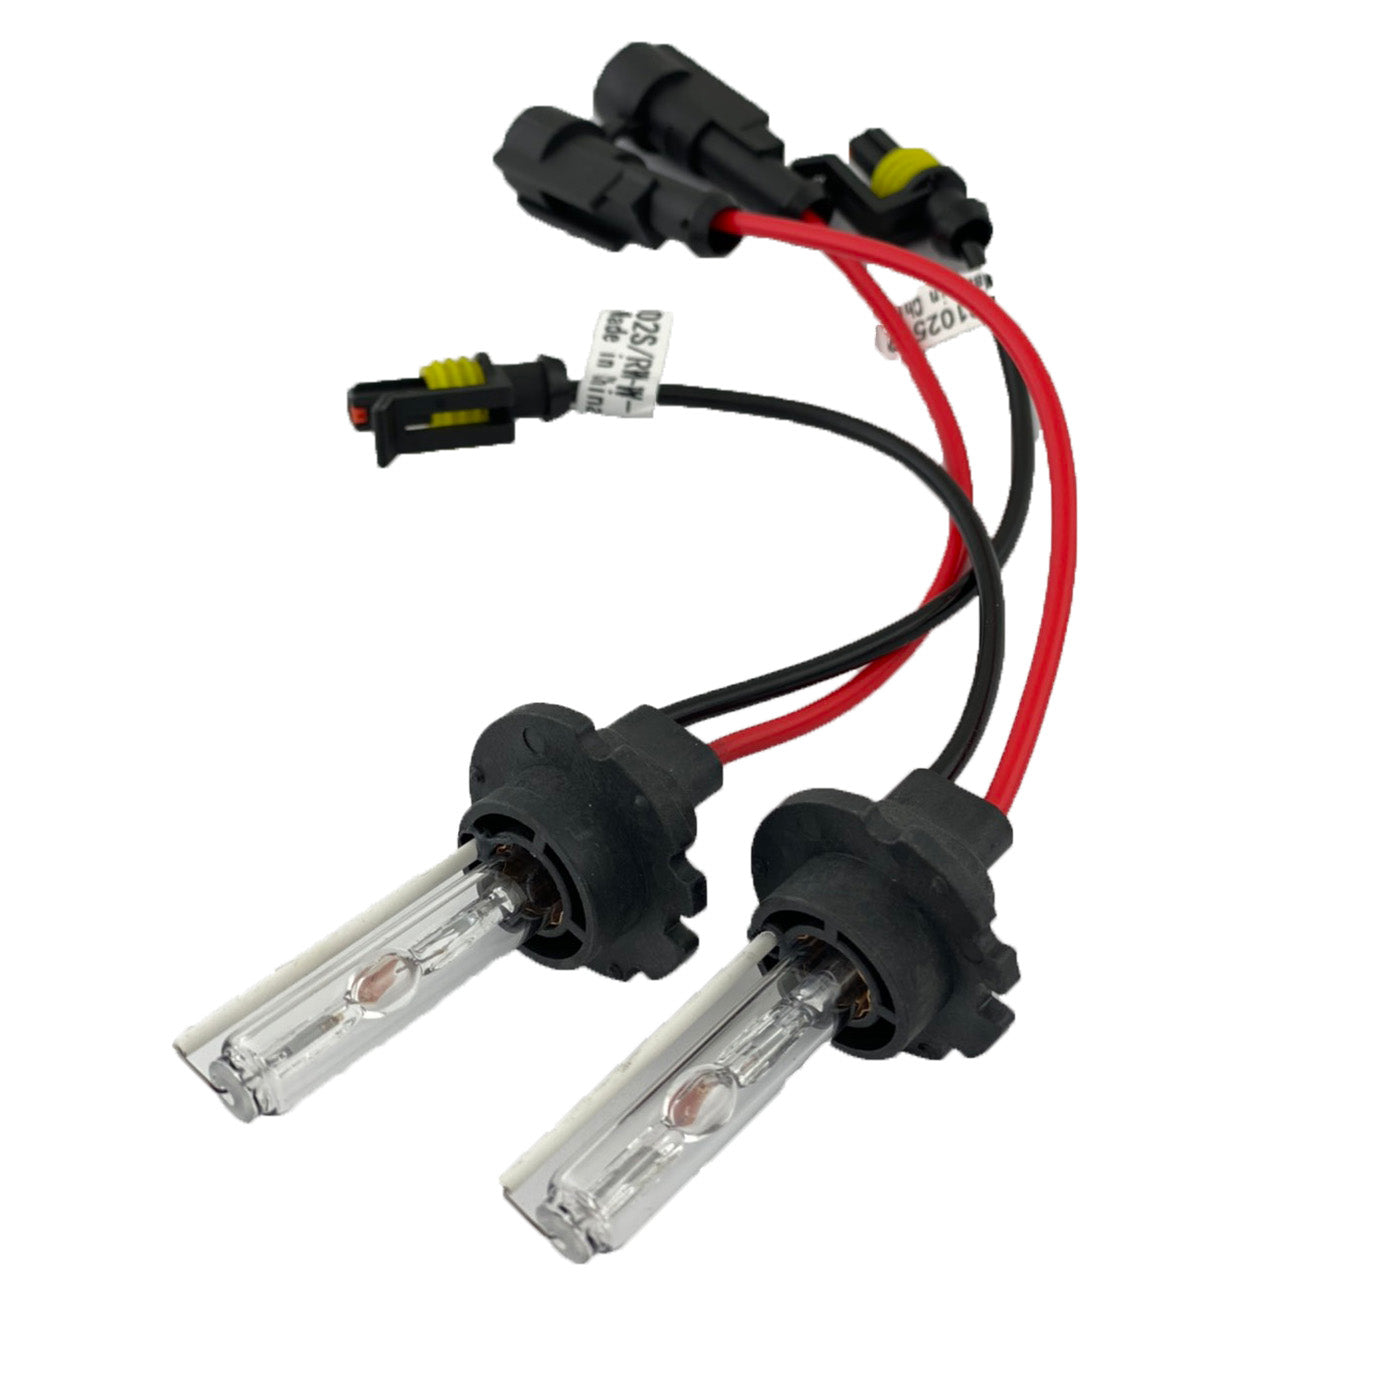 Xentec HID replacement bulbs (sold in pair) – xenteclighting